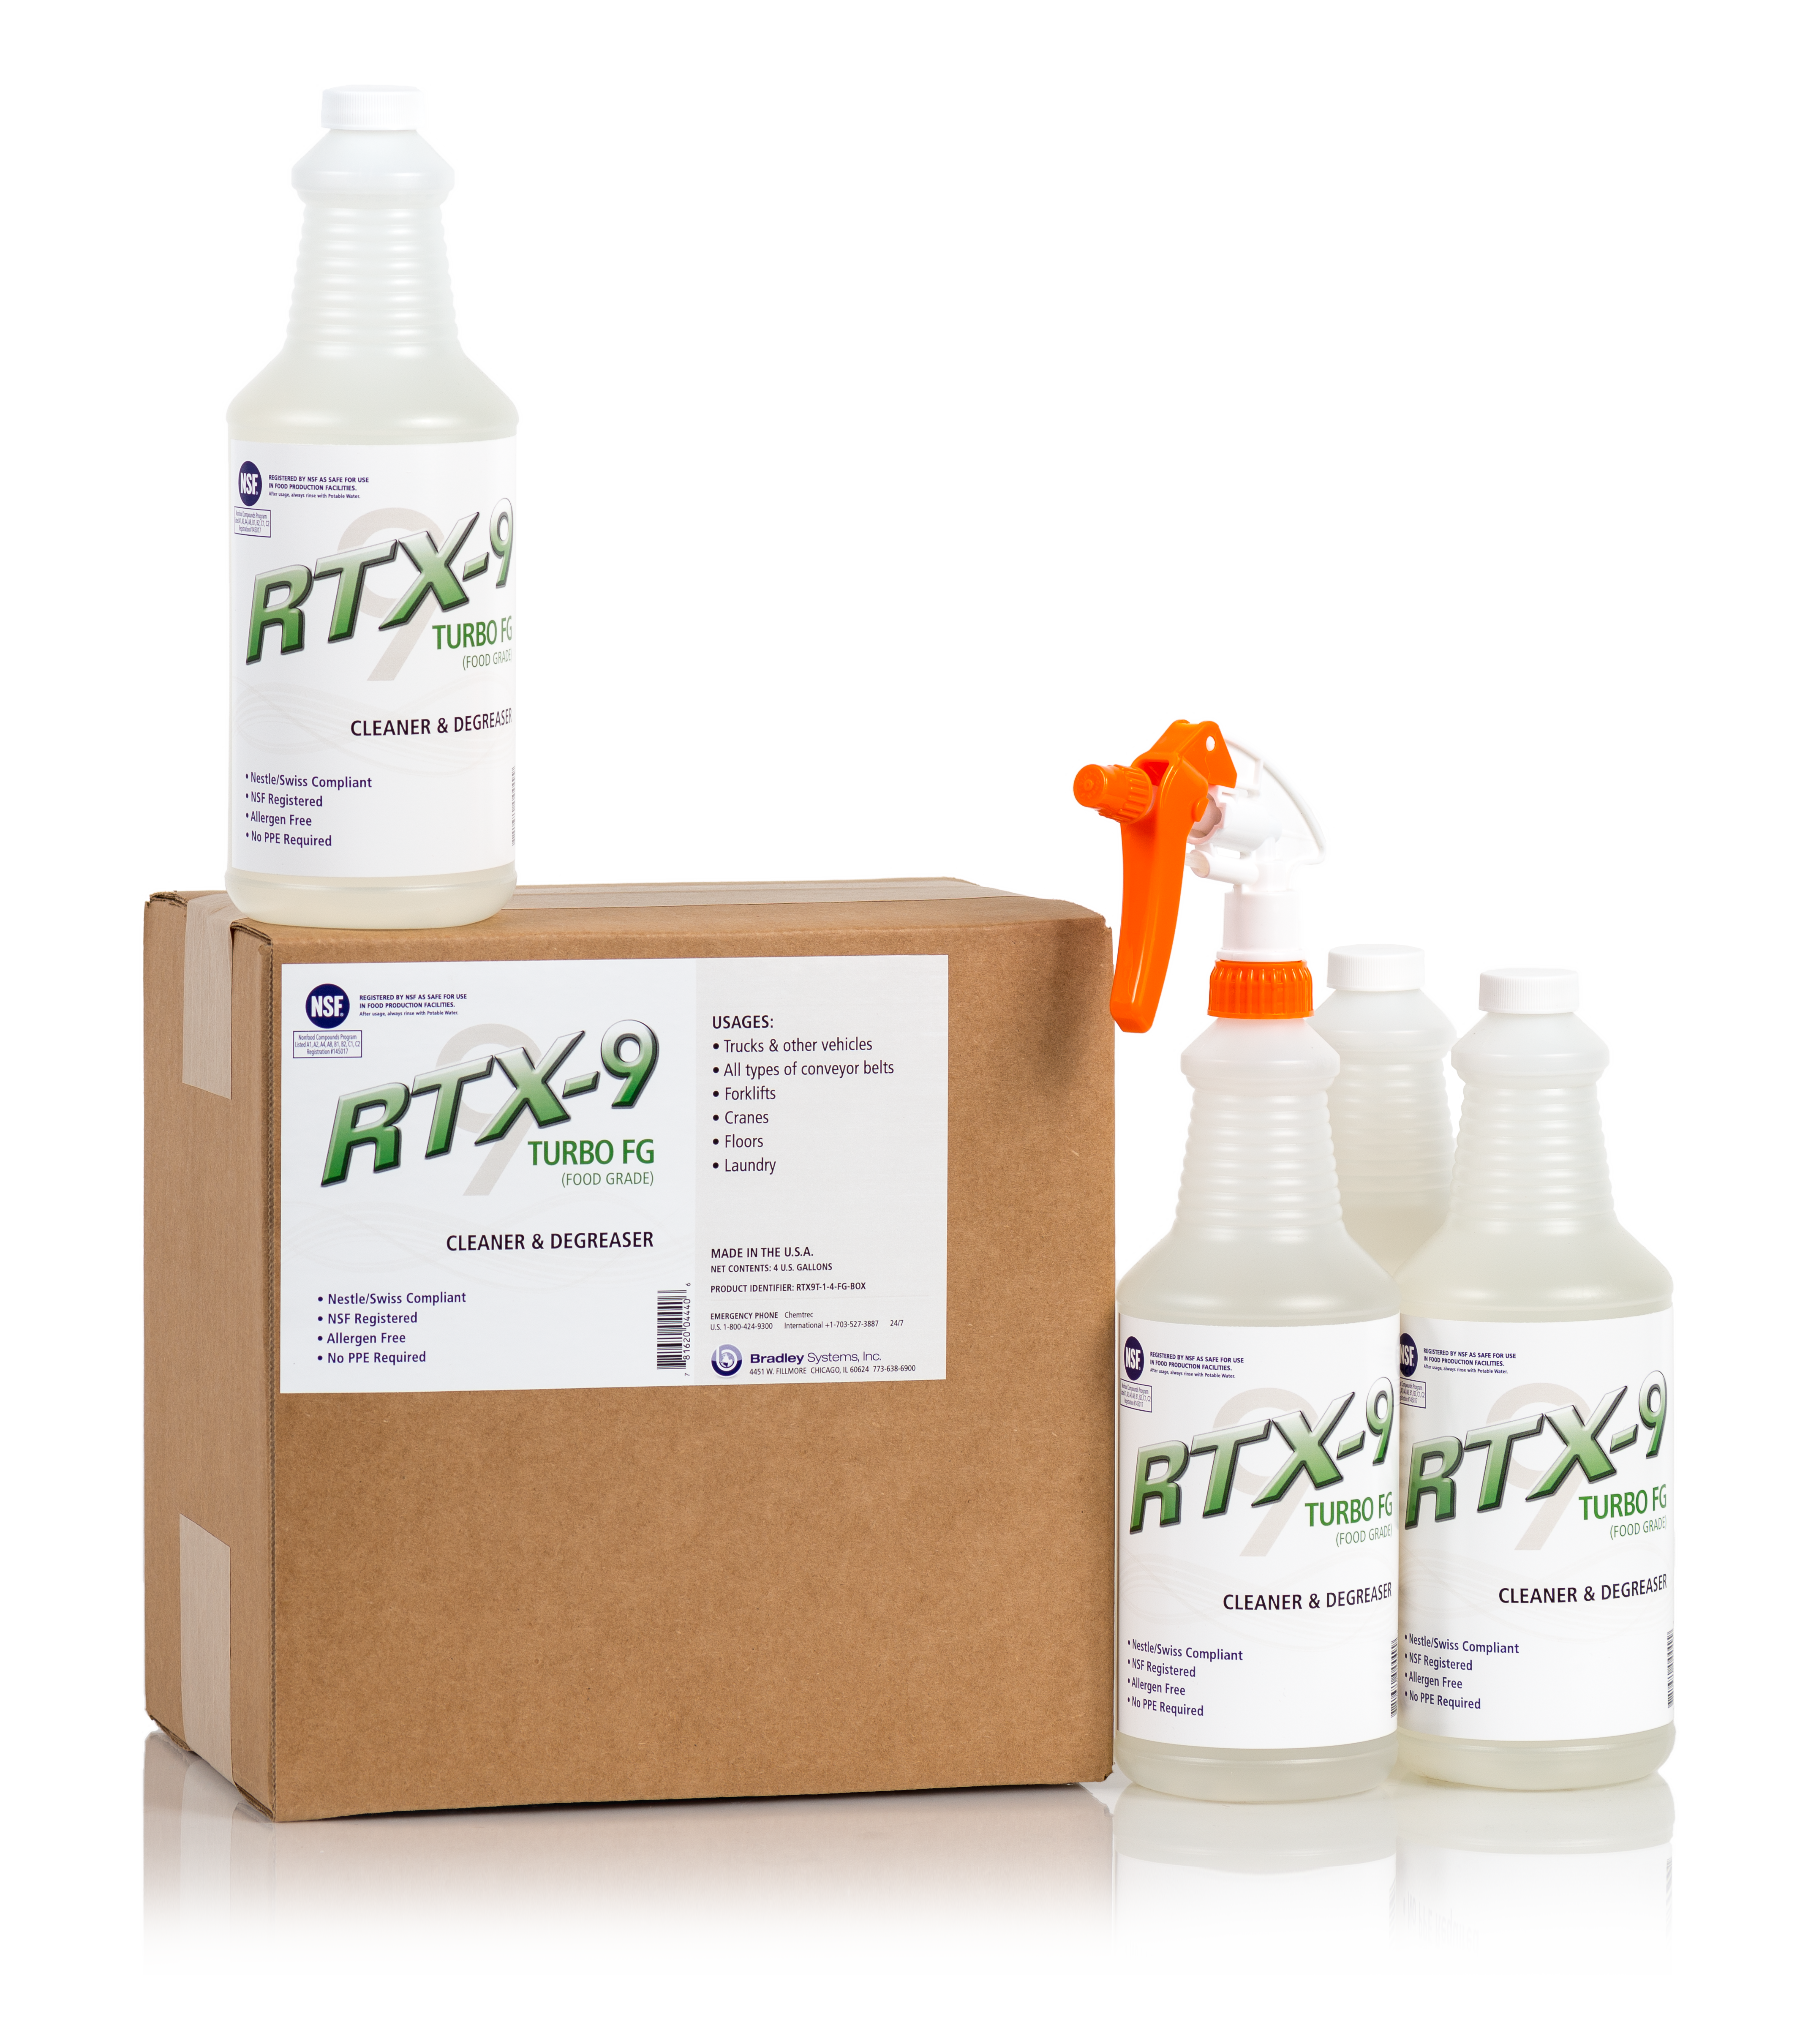 Introducing RTX-9 Turbo Food Grade – The Ideal Cleaner for the Food Industry